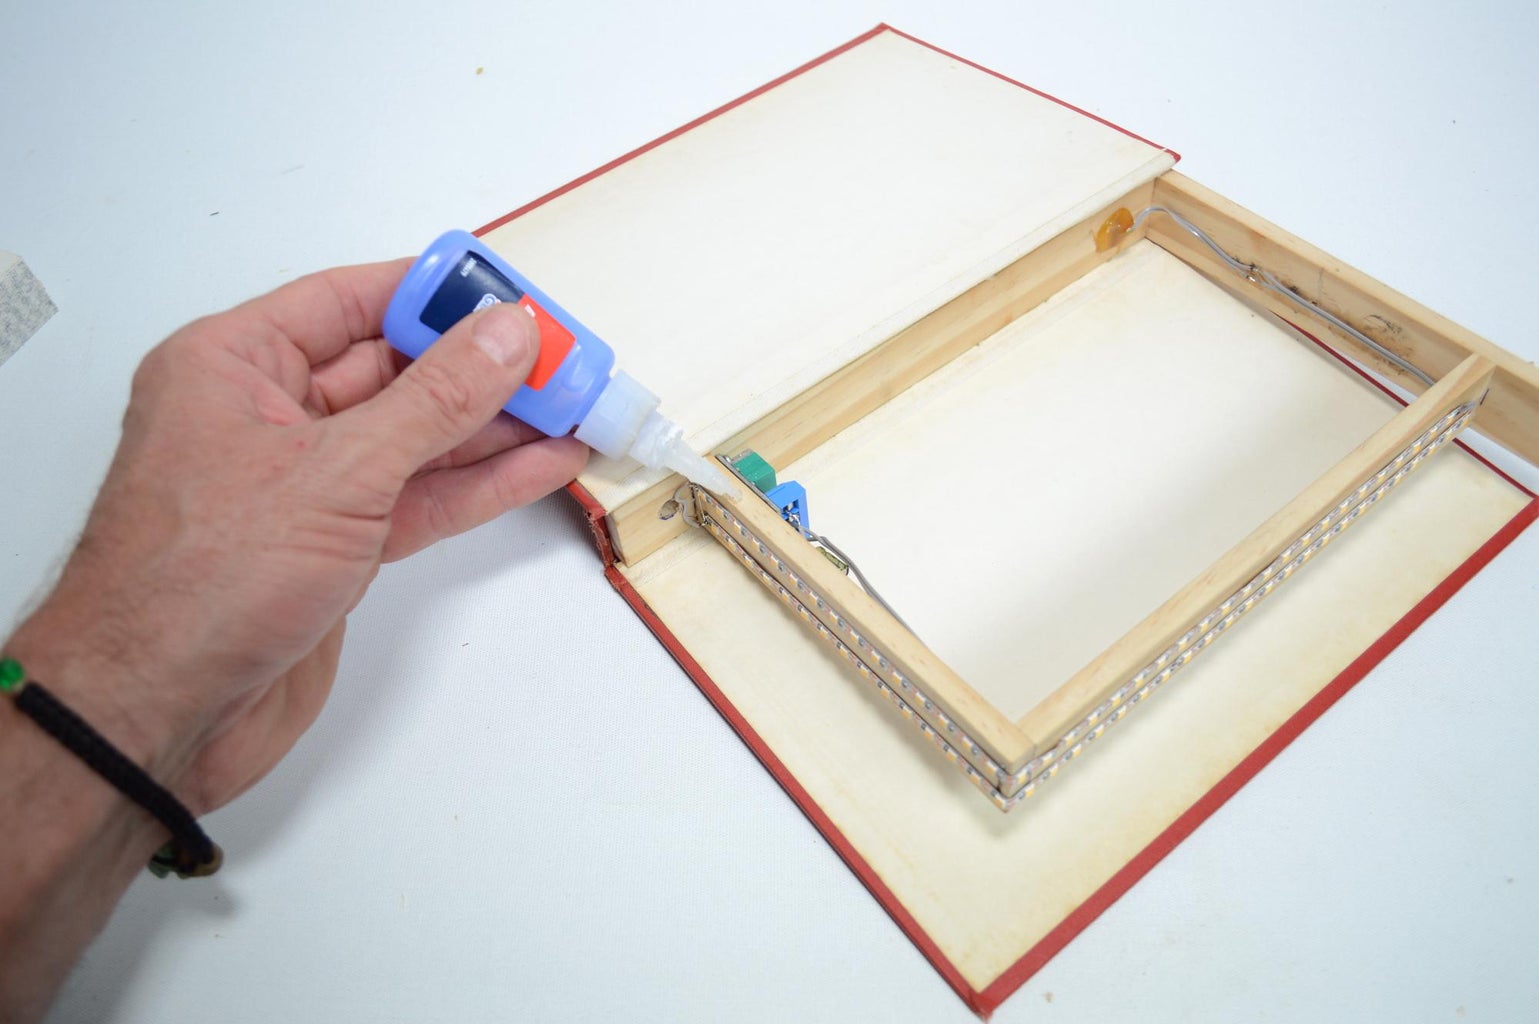 Gluing the Book to the Frame - Part 2